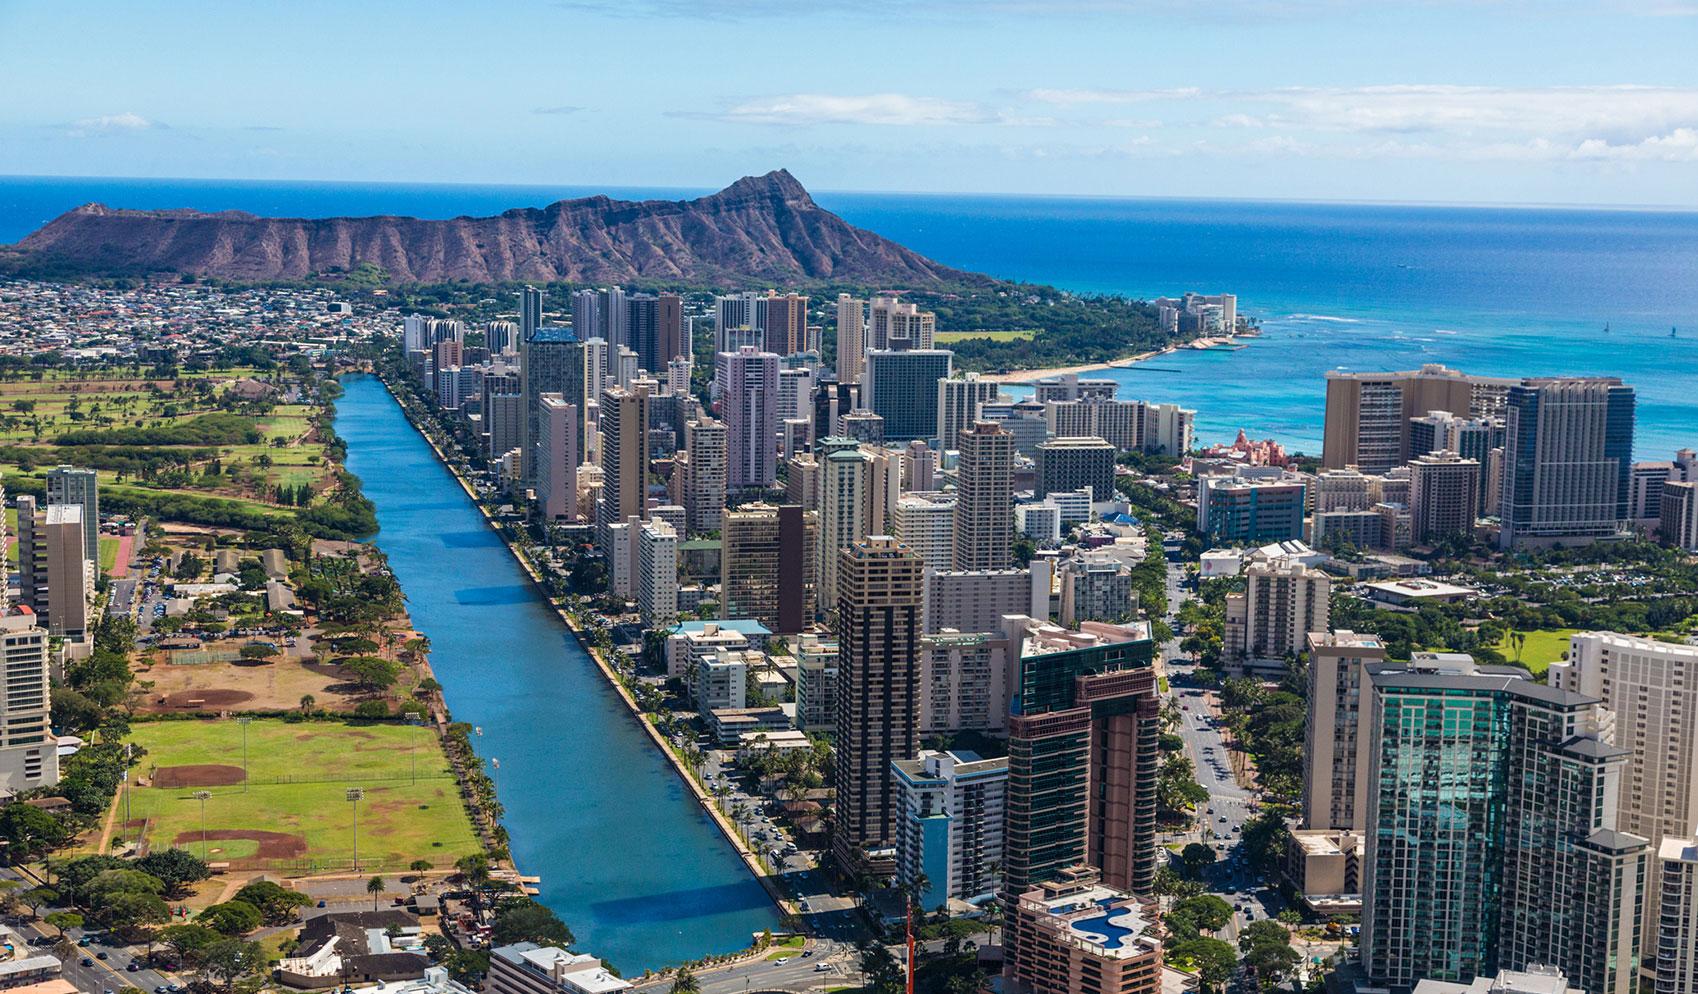 Oahu, known as "The Gathering Place", is the third-largest of the Hawaiian Islands. https://www.gohawaii.com/islands/oahu